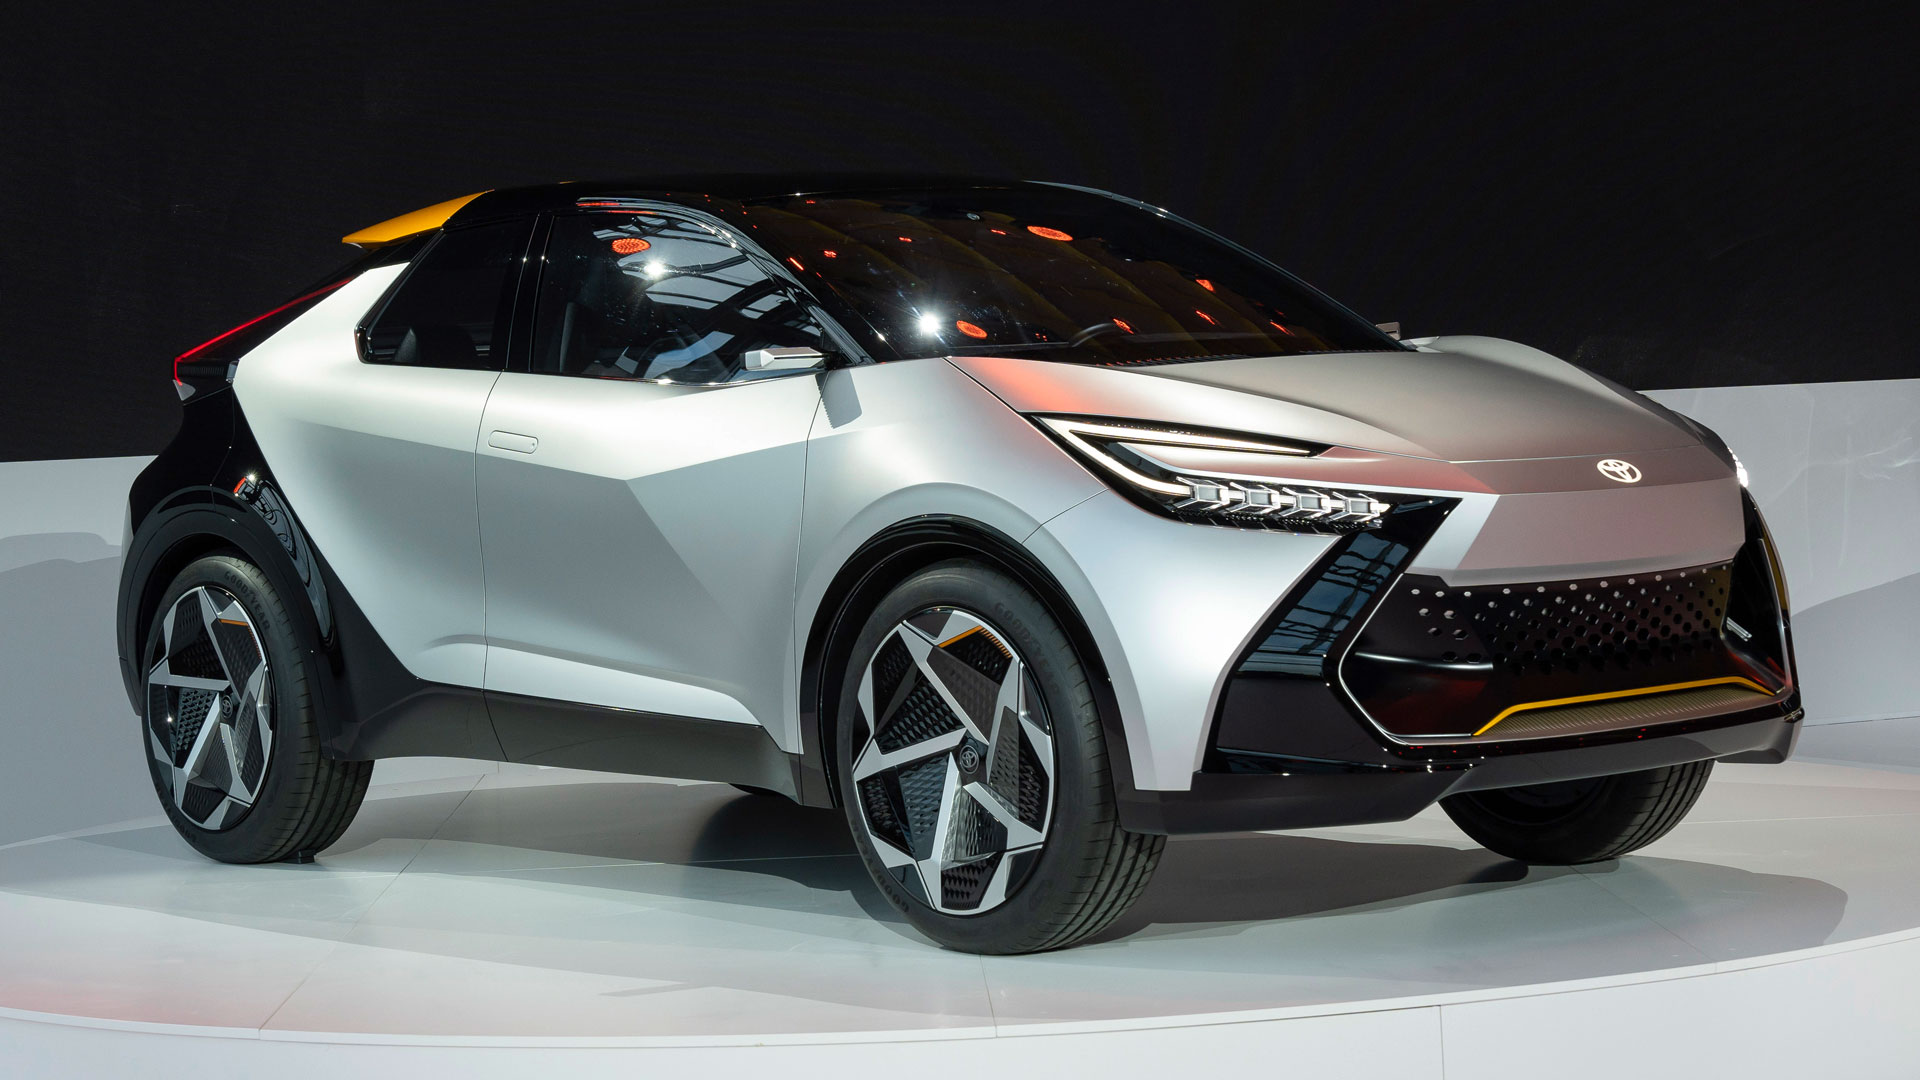 Redesigned Toyota C-HR previewed with plug-in hybrid concept